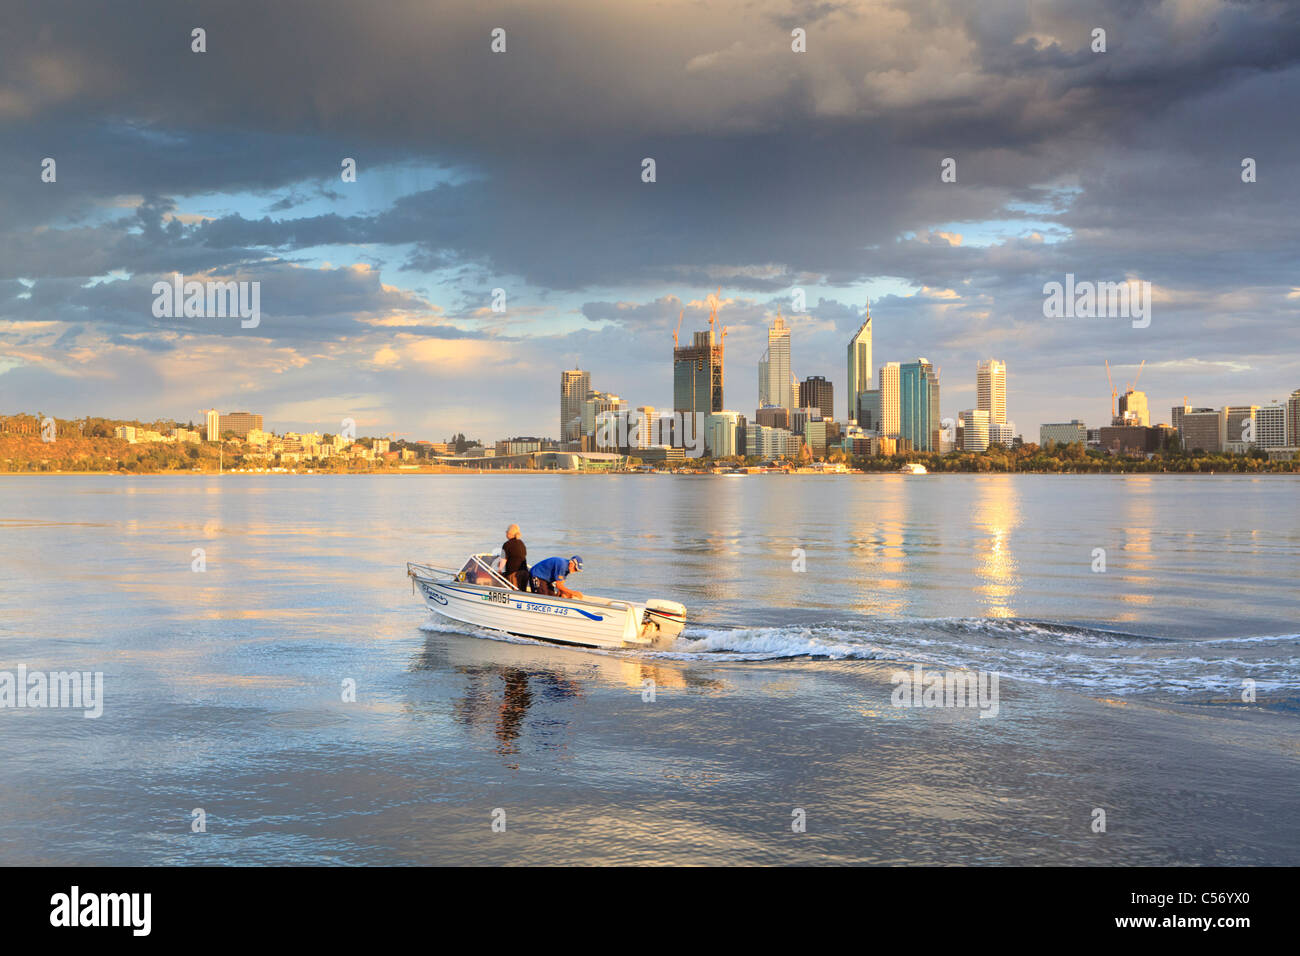 Motor powered boat on the Swan River, Perth Stock Photo